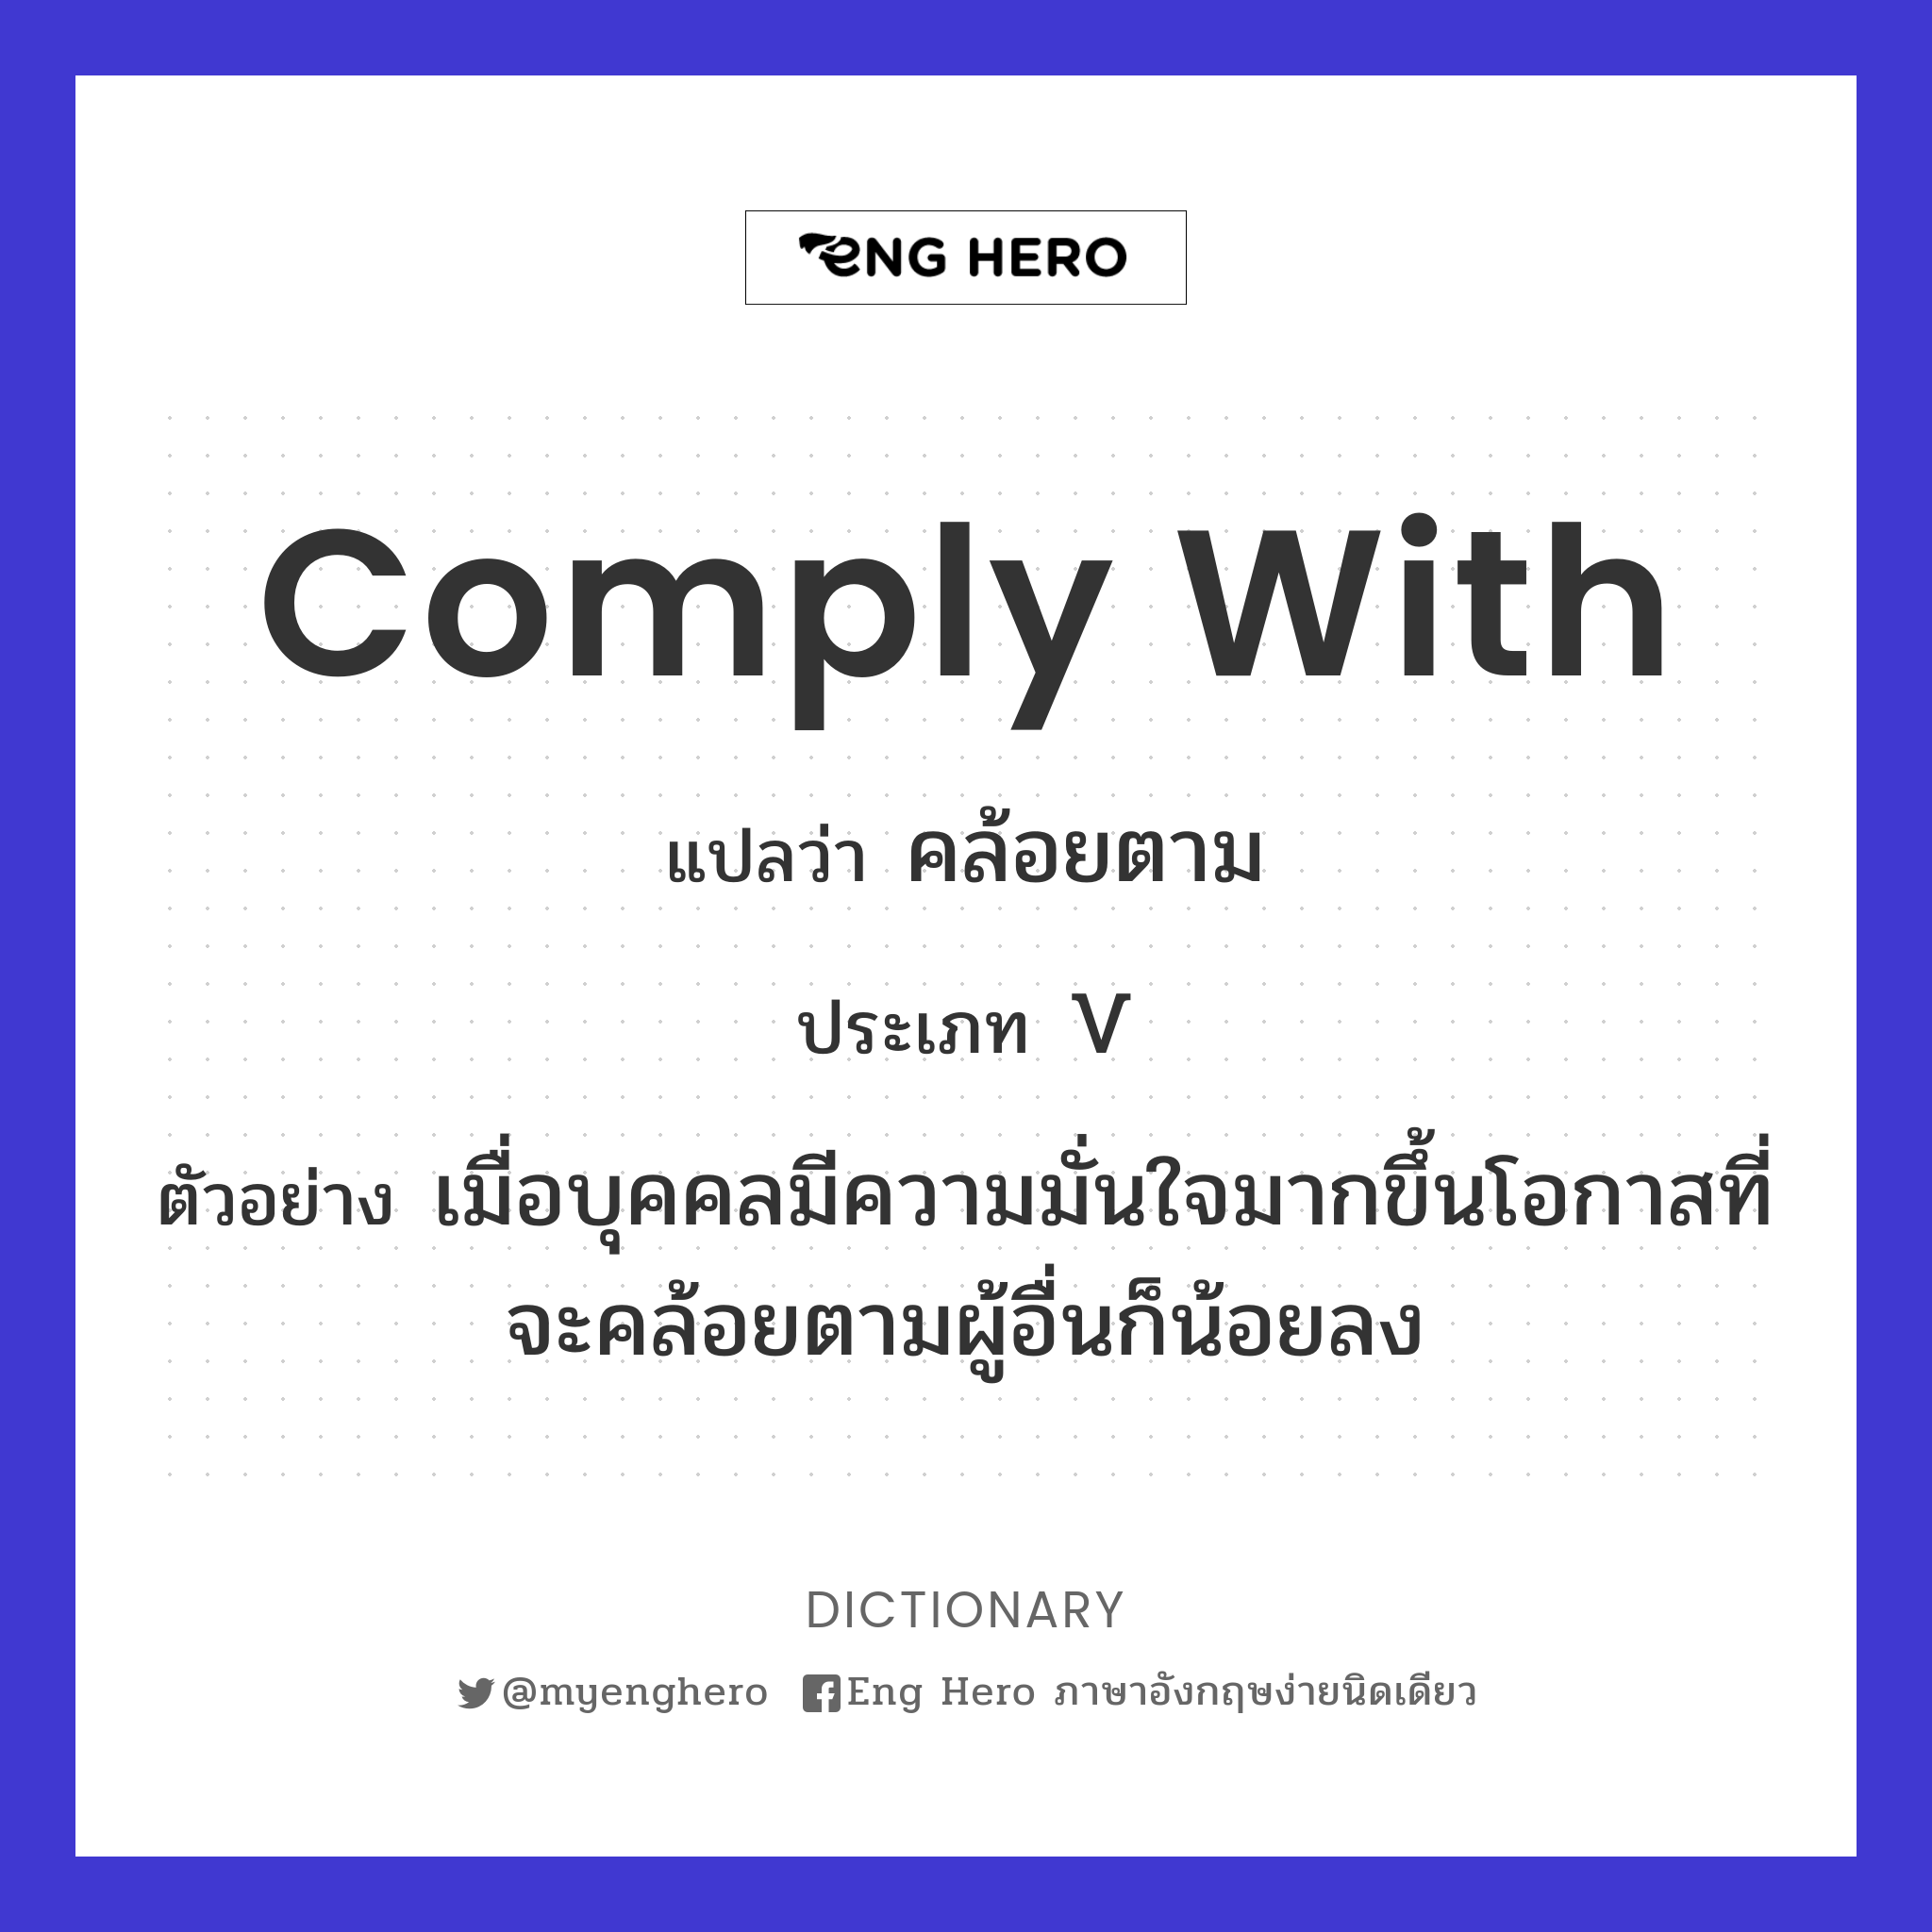 comply with